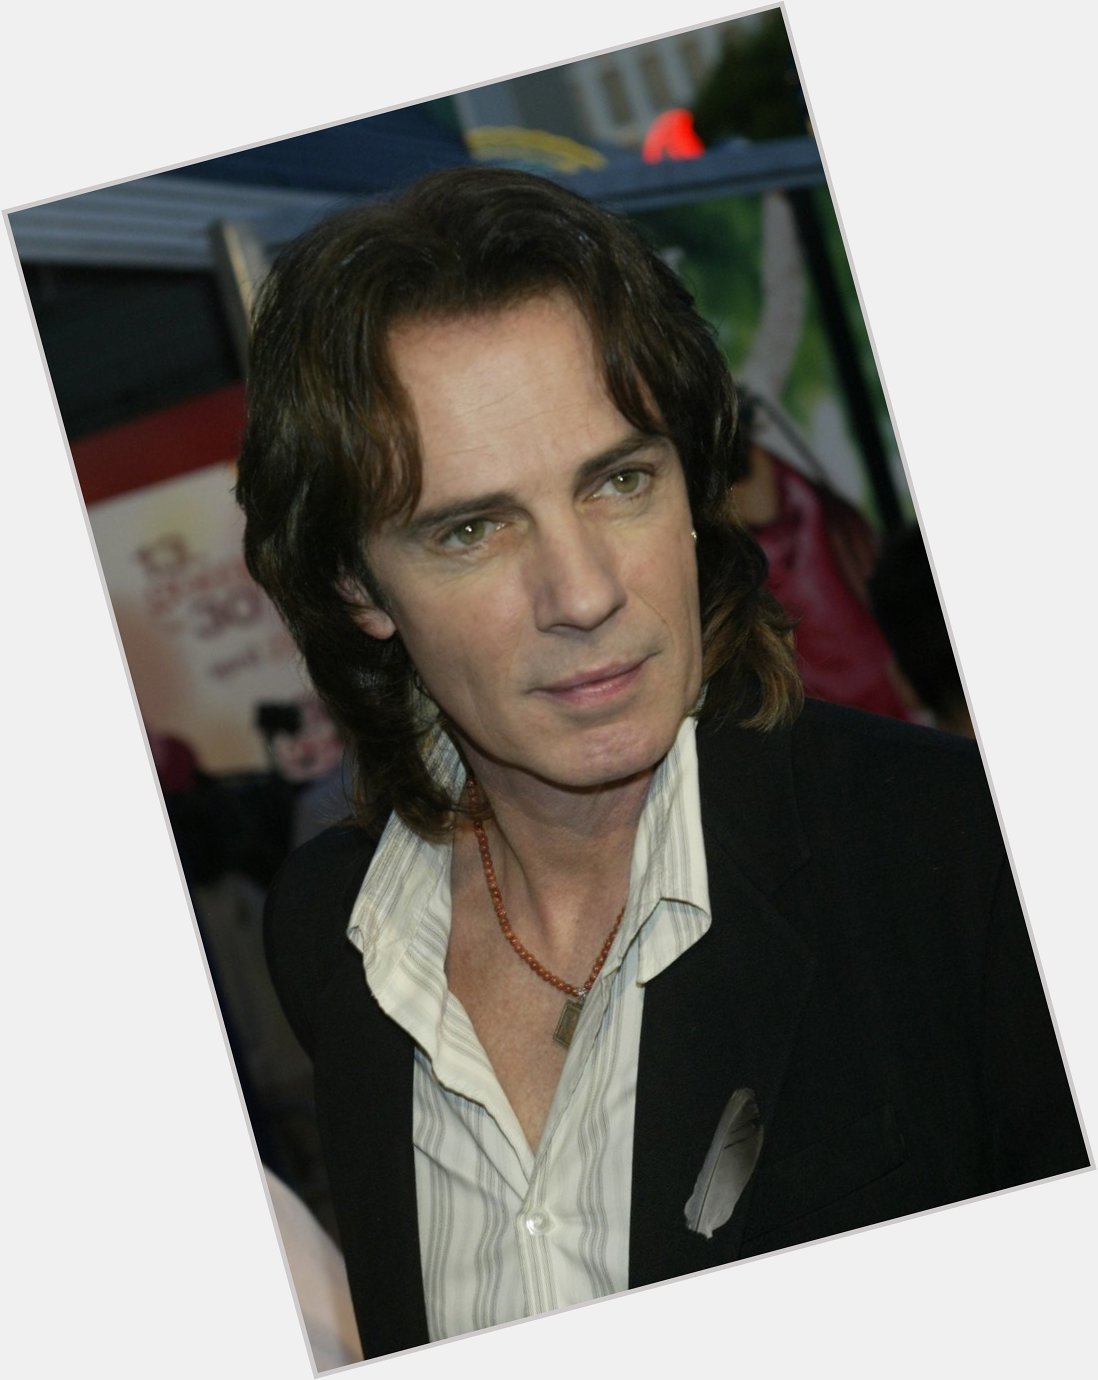 Happy birthday wishes going out to the amazingly talented Rick Springfield, who turns 72 years old today! (Reuters) 